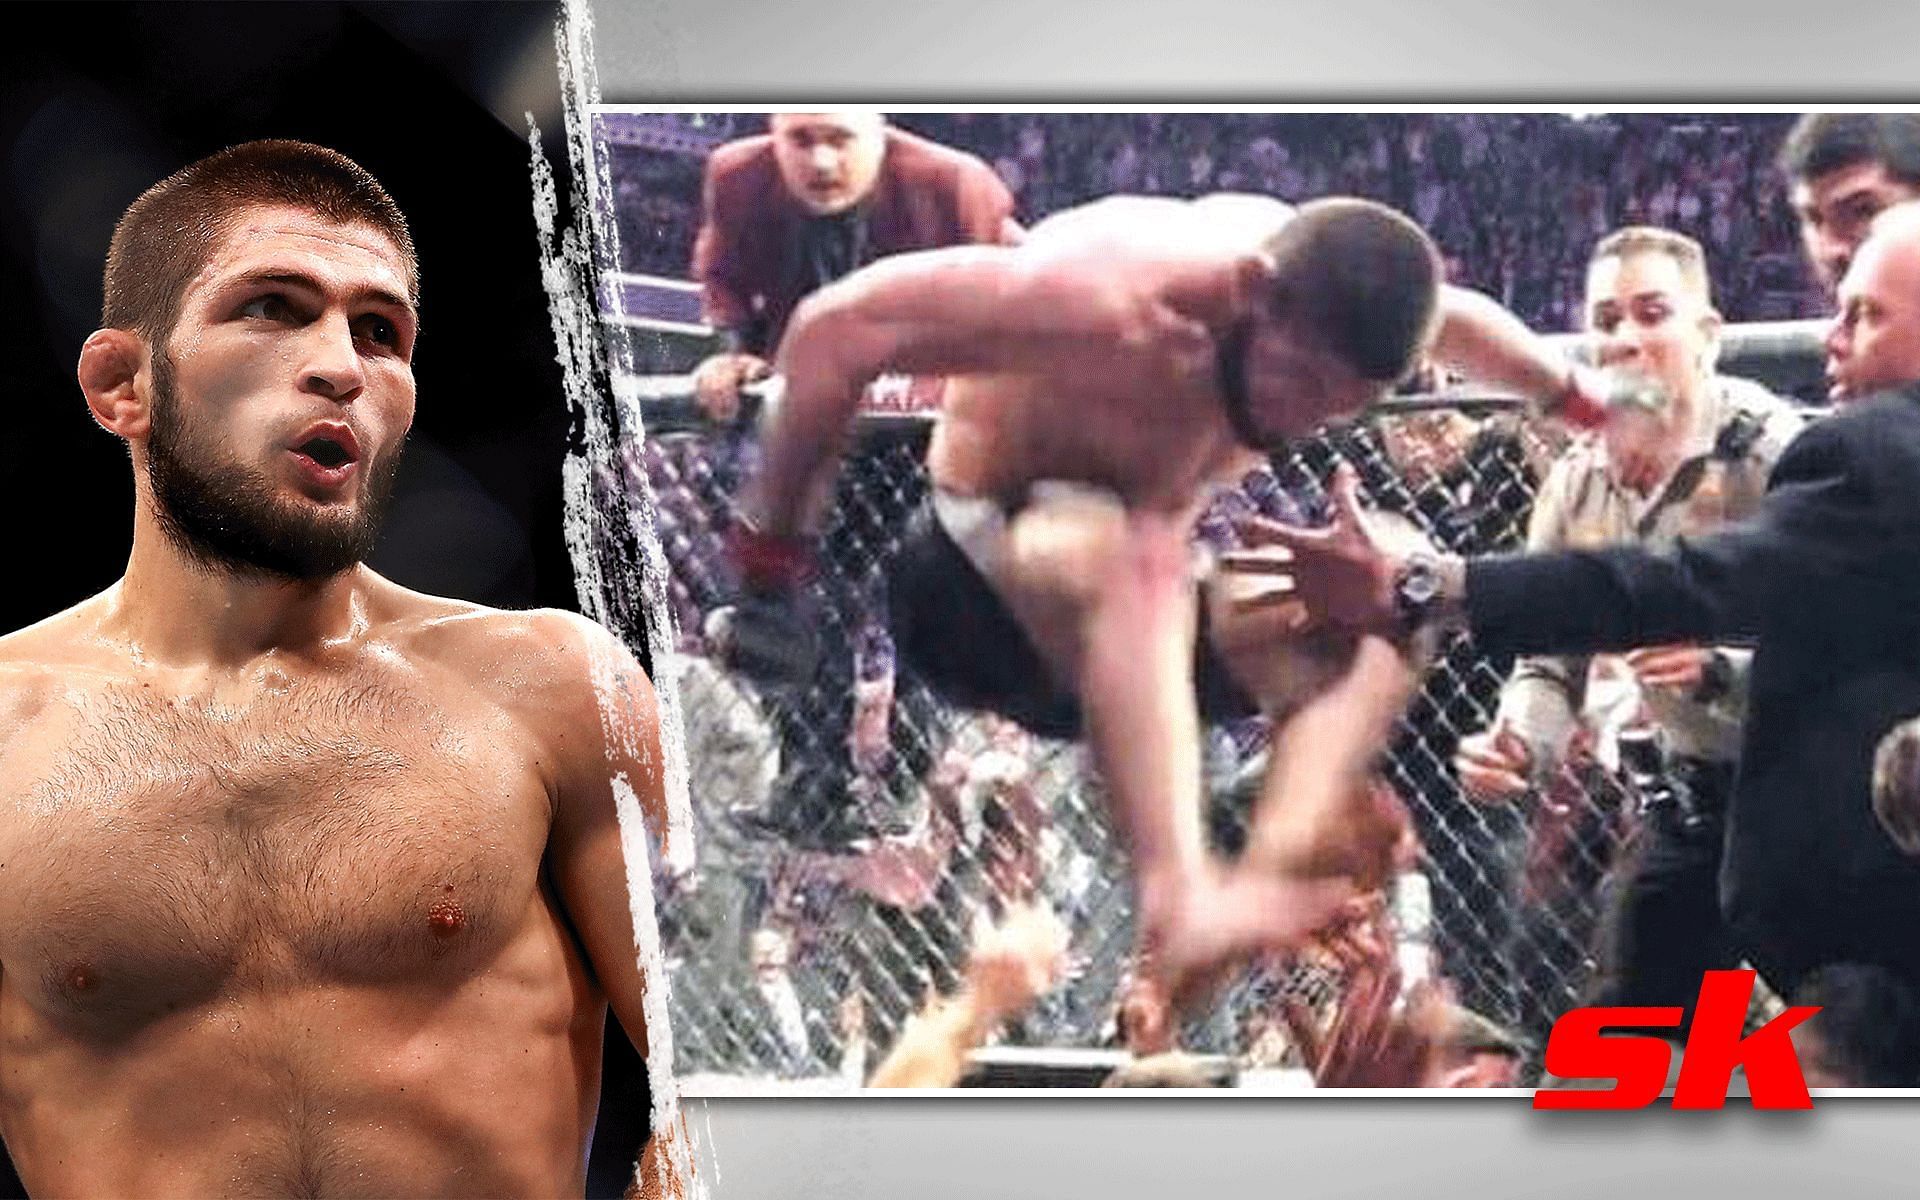 Khabib Nurmagomedov (left) leaping out after UFC 229 main event (right). [Images courtesy: left image from Getty Images and right image from Twitter @GreenManTalks]